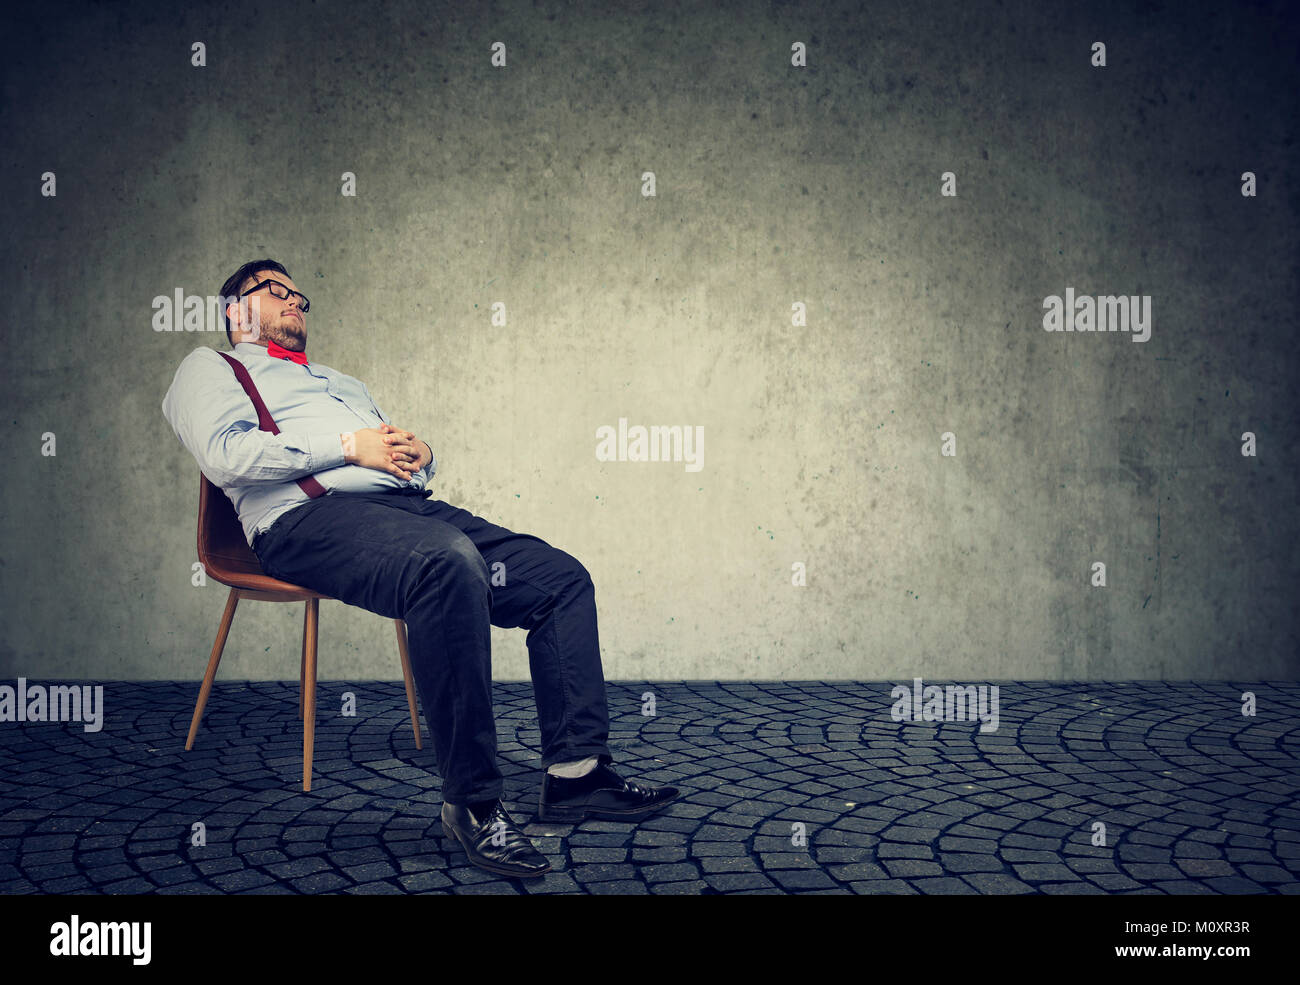 Fat man in formal clothing sitting on chair and sleeping in dream. Stock Photo